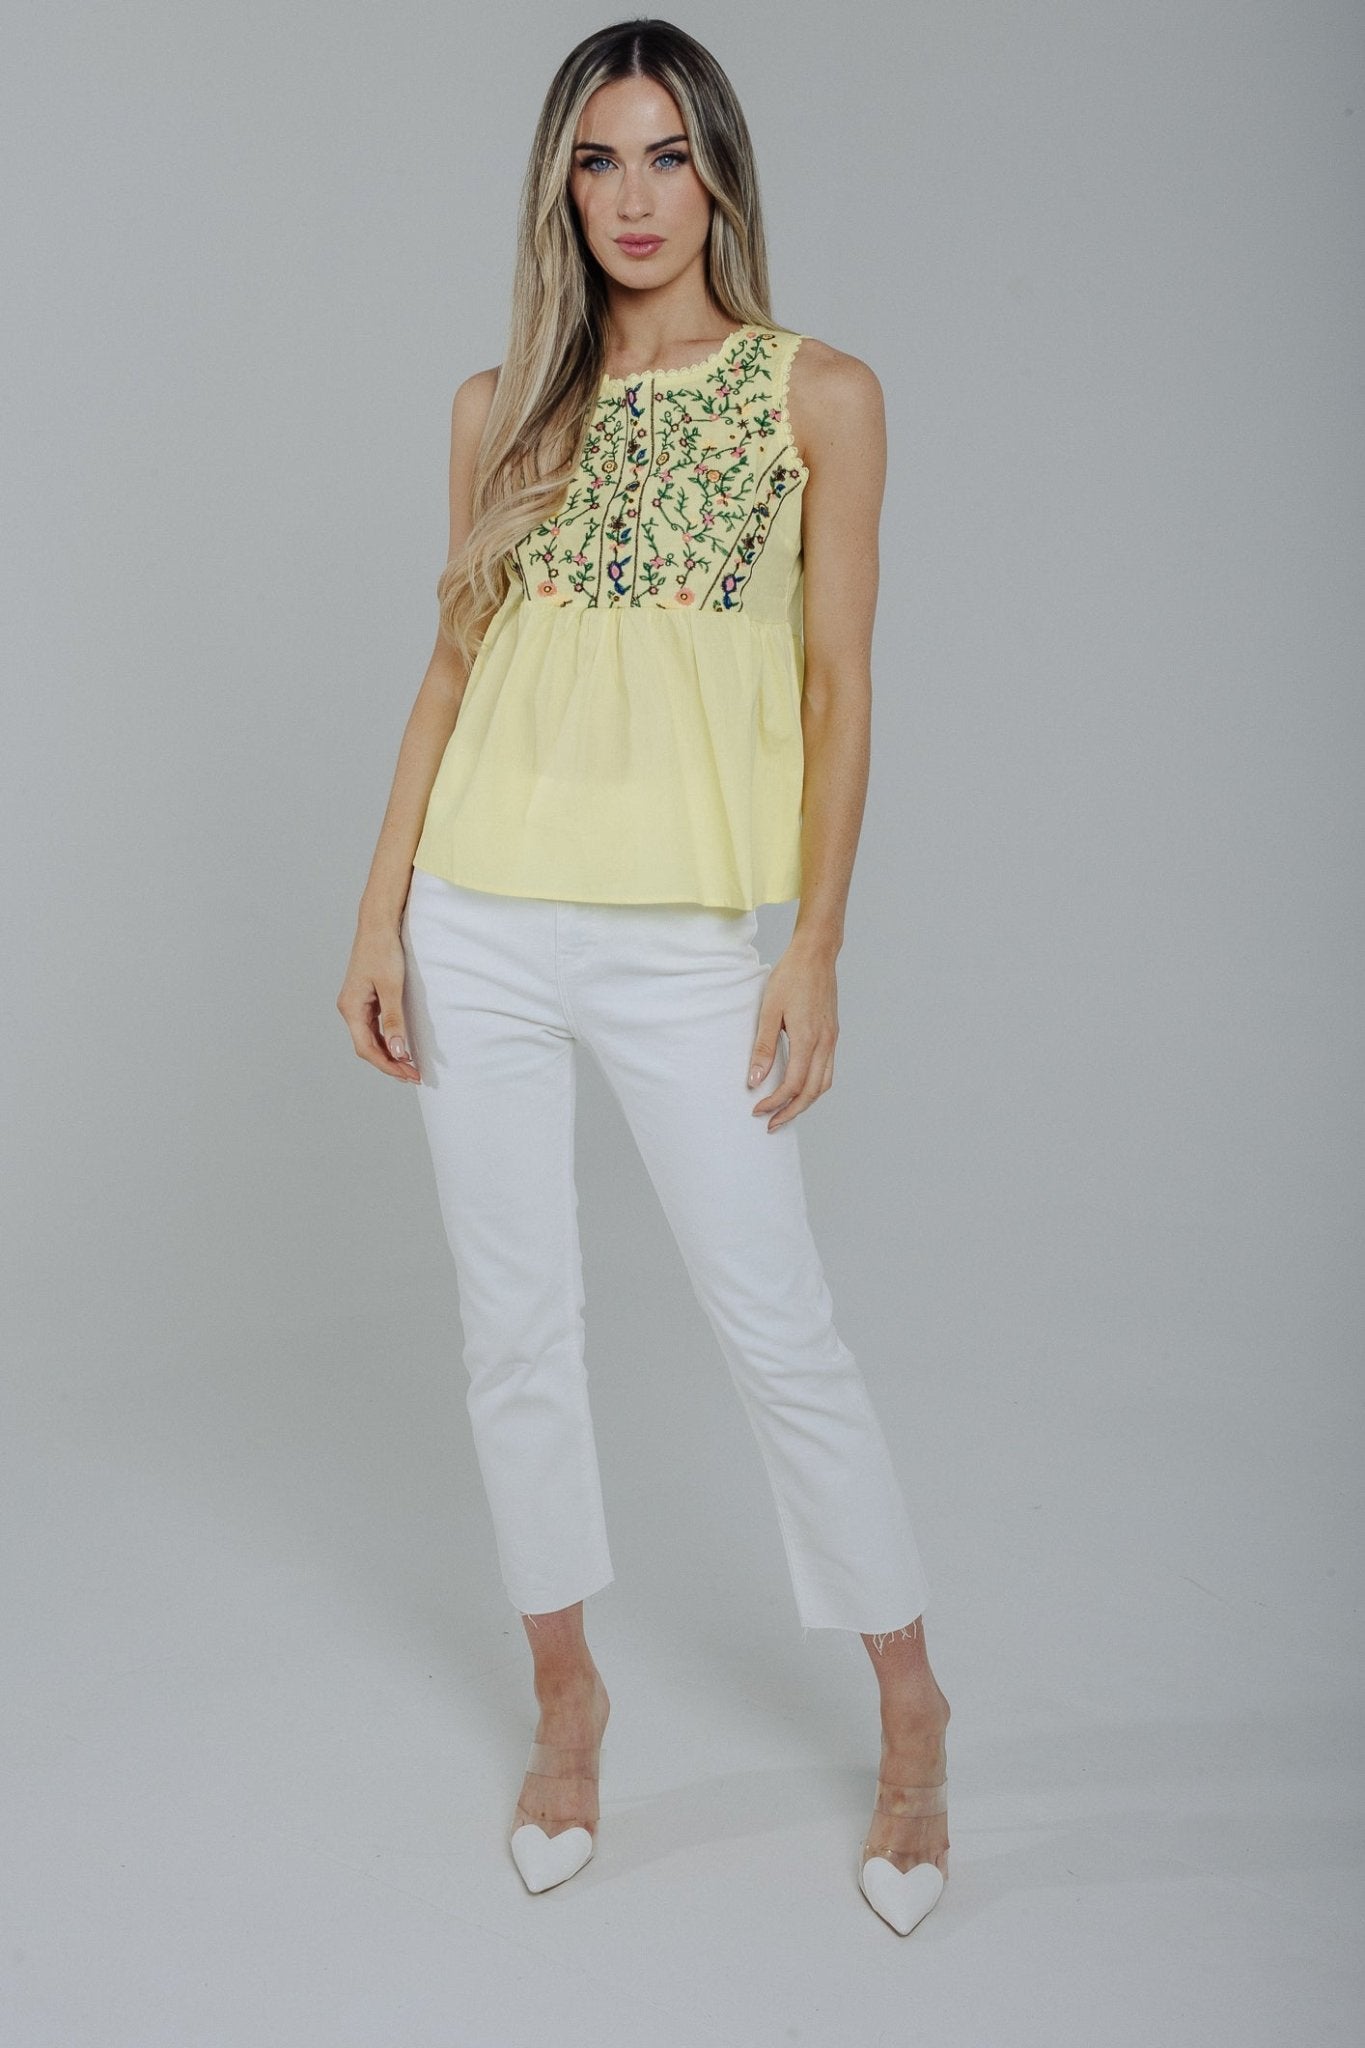 Sally Peplum Sleeveless Embroidered Top In Lime - The Walk in Wardrobe